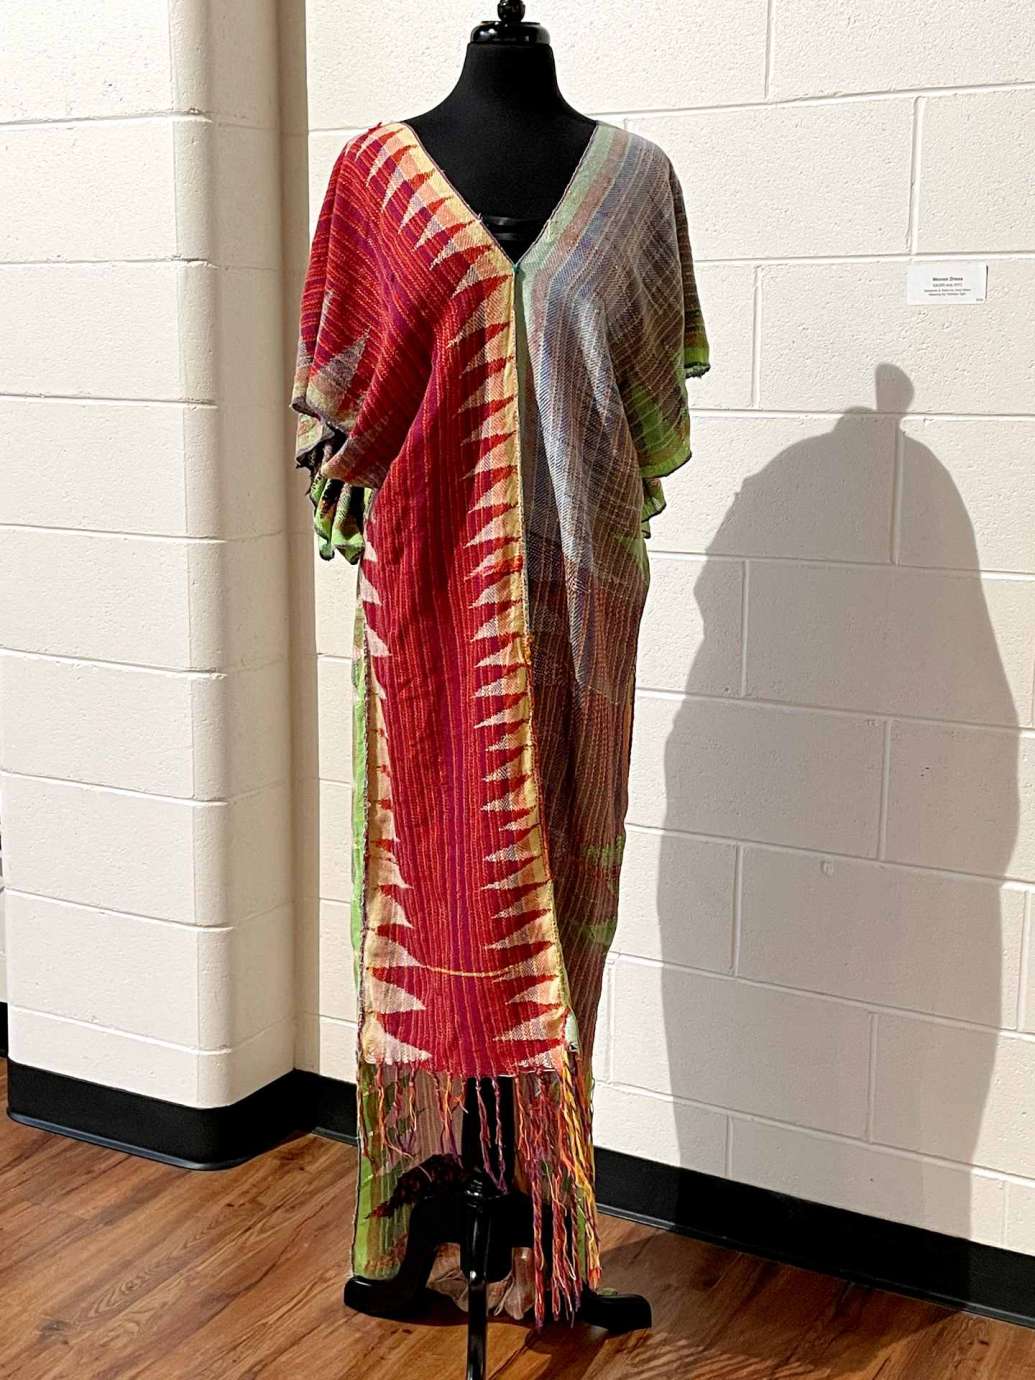 A woven dress hanging on a mannequin 